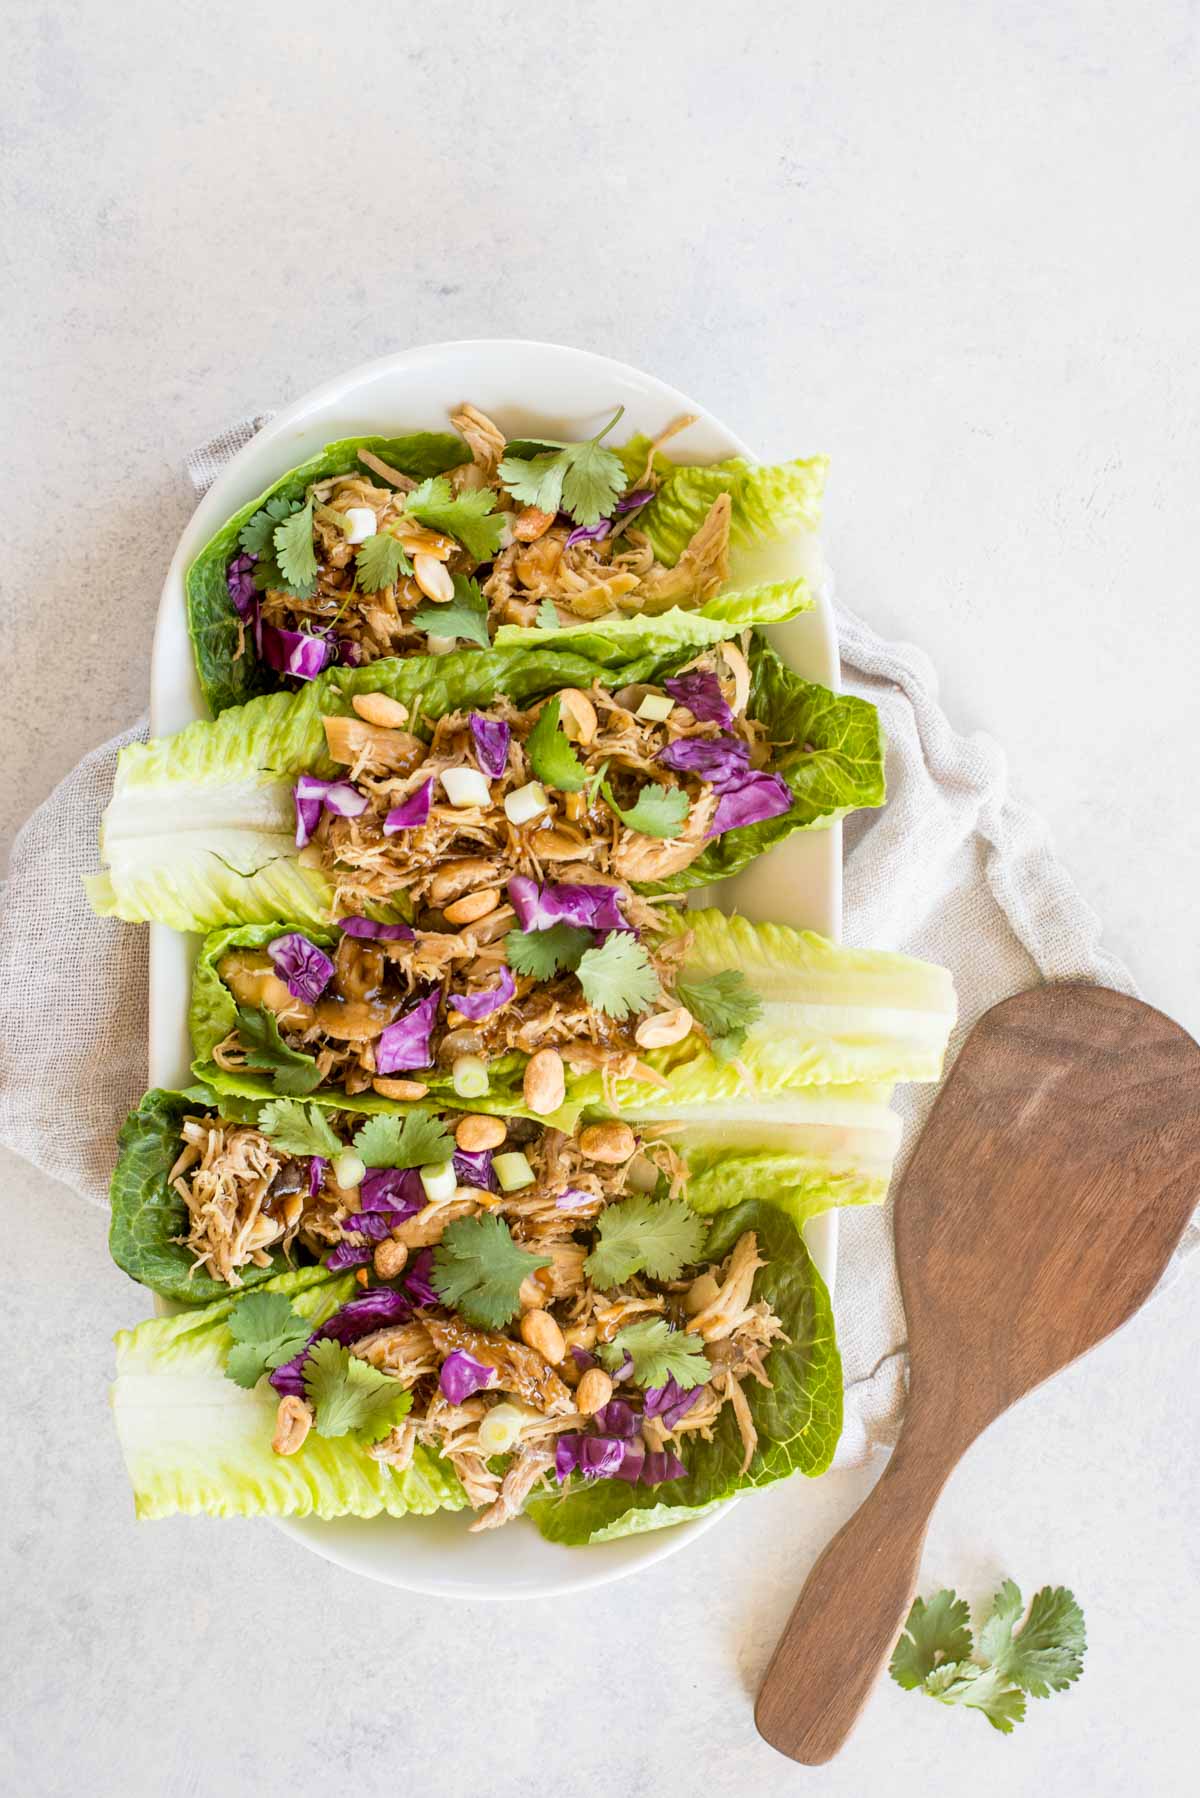 This recipe takes healthy to the next level with flavorful delicious Asian Chicken Lettuce Wraps.